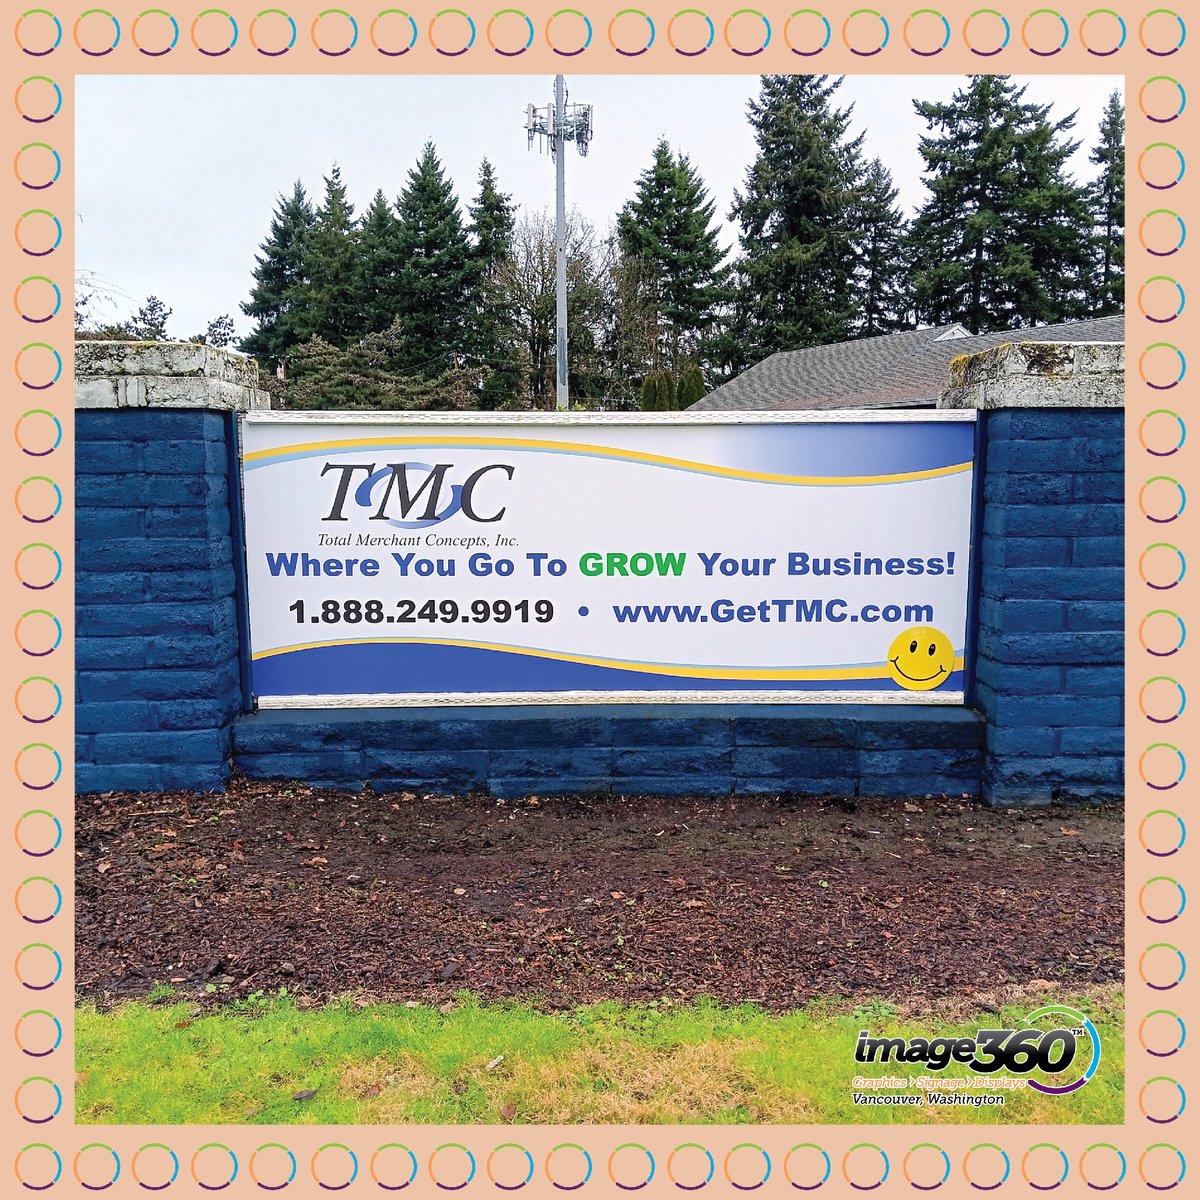 TMC's existing monument sign got a face lift! We created and installed a new panel to replace the worn one.
#image360 #image360vancouver #vancouverwa #clarkcounty #portland #signage #graphics #displays #signs #graphicdesign #design #exteriorsignage #monumentsign #branding...